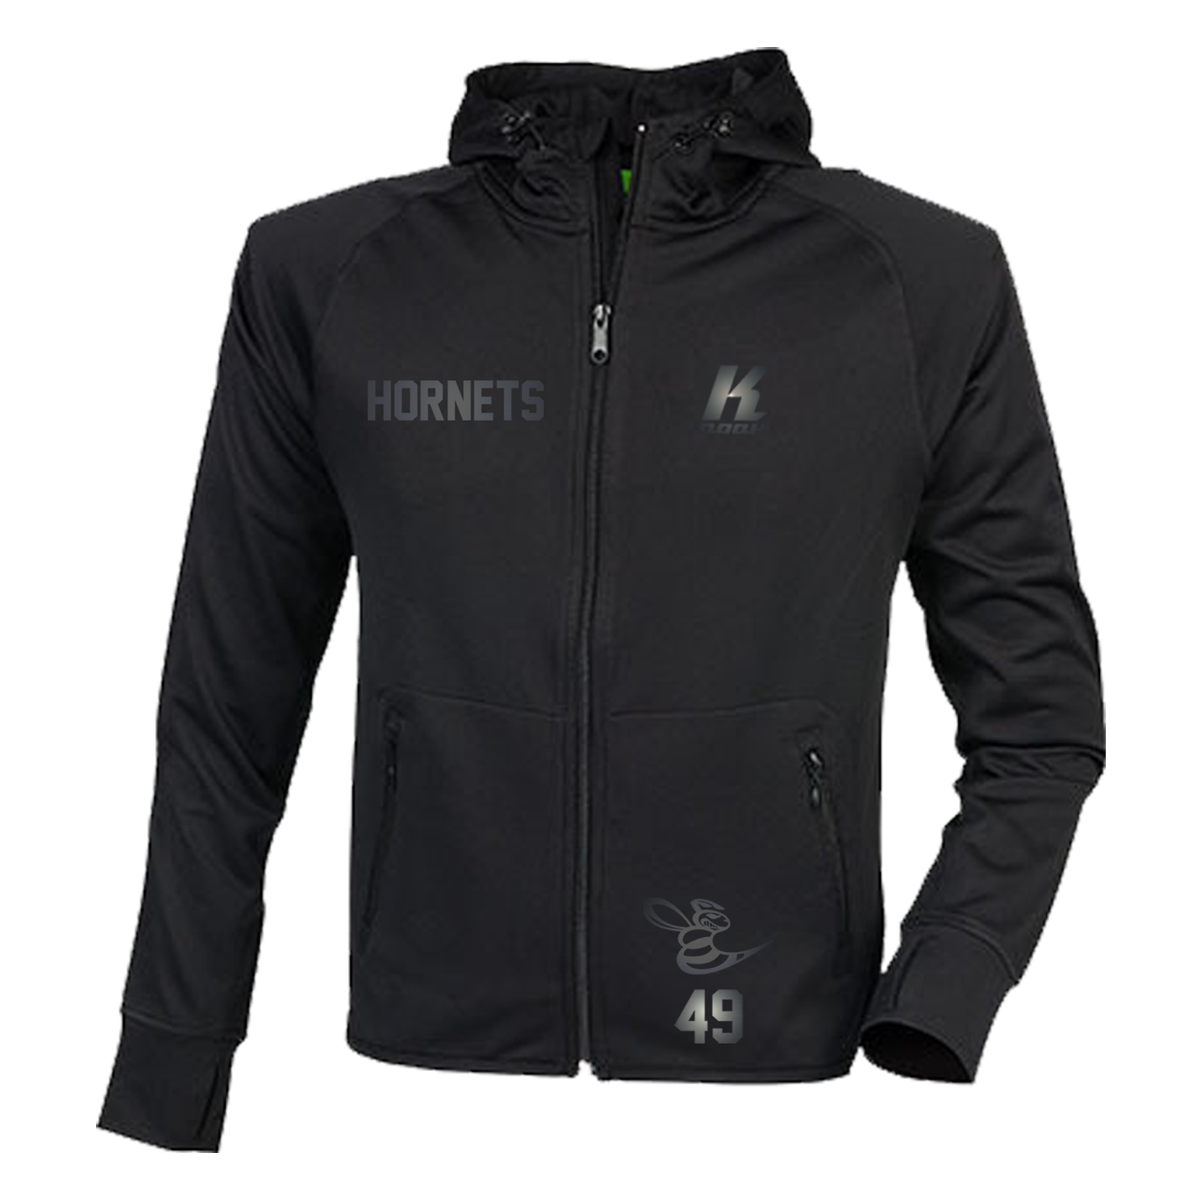 Hornets "Blackline" Zip Hoodie TL550 with Playernumber or Initials